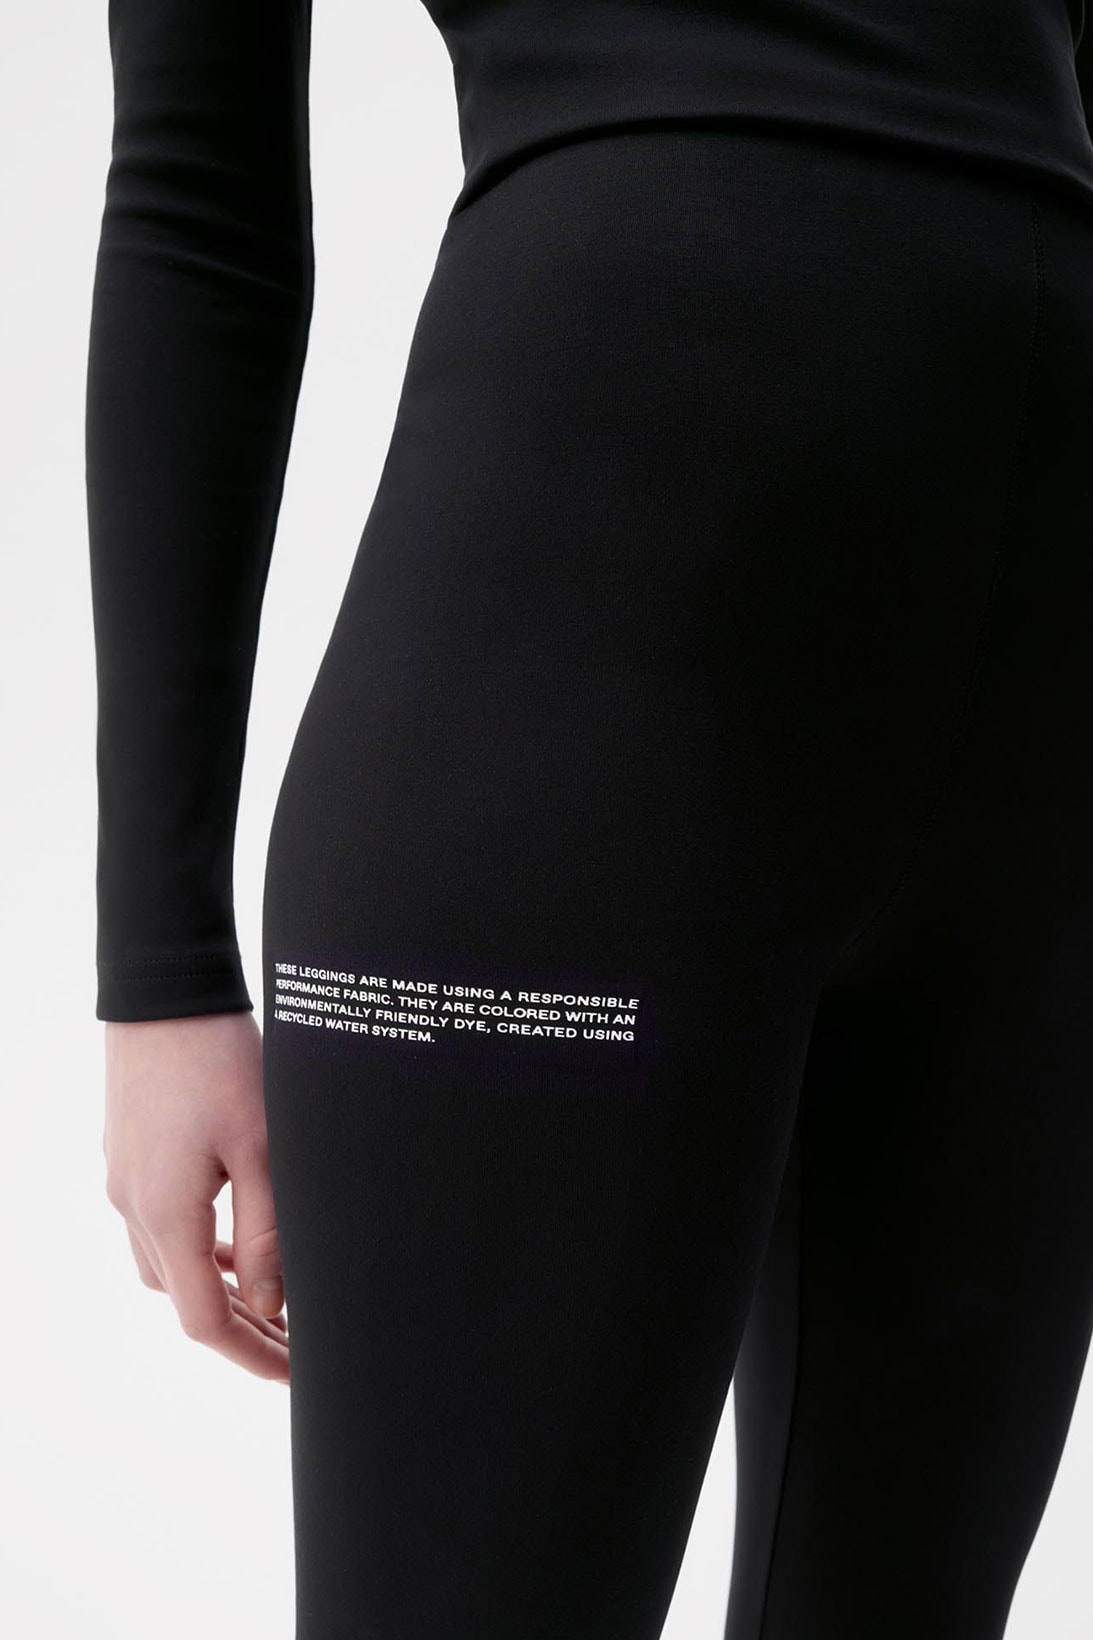 pangaia roica stretch athleisure sustainable collection turtleneck top leggings black